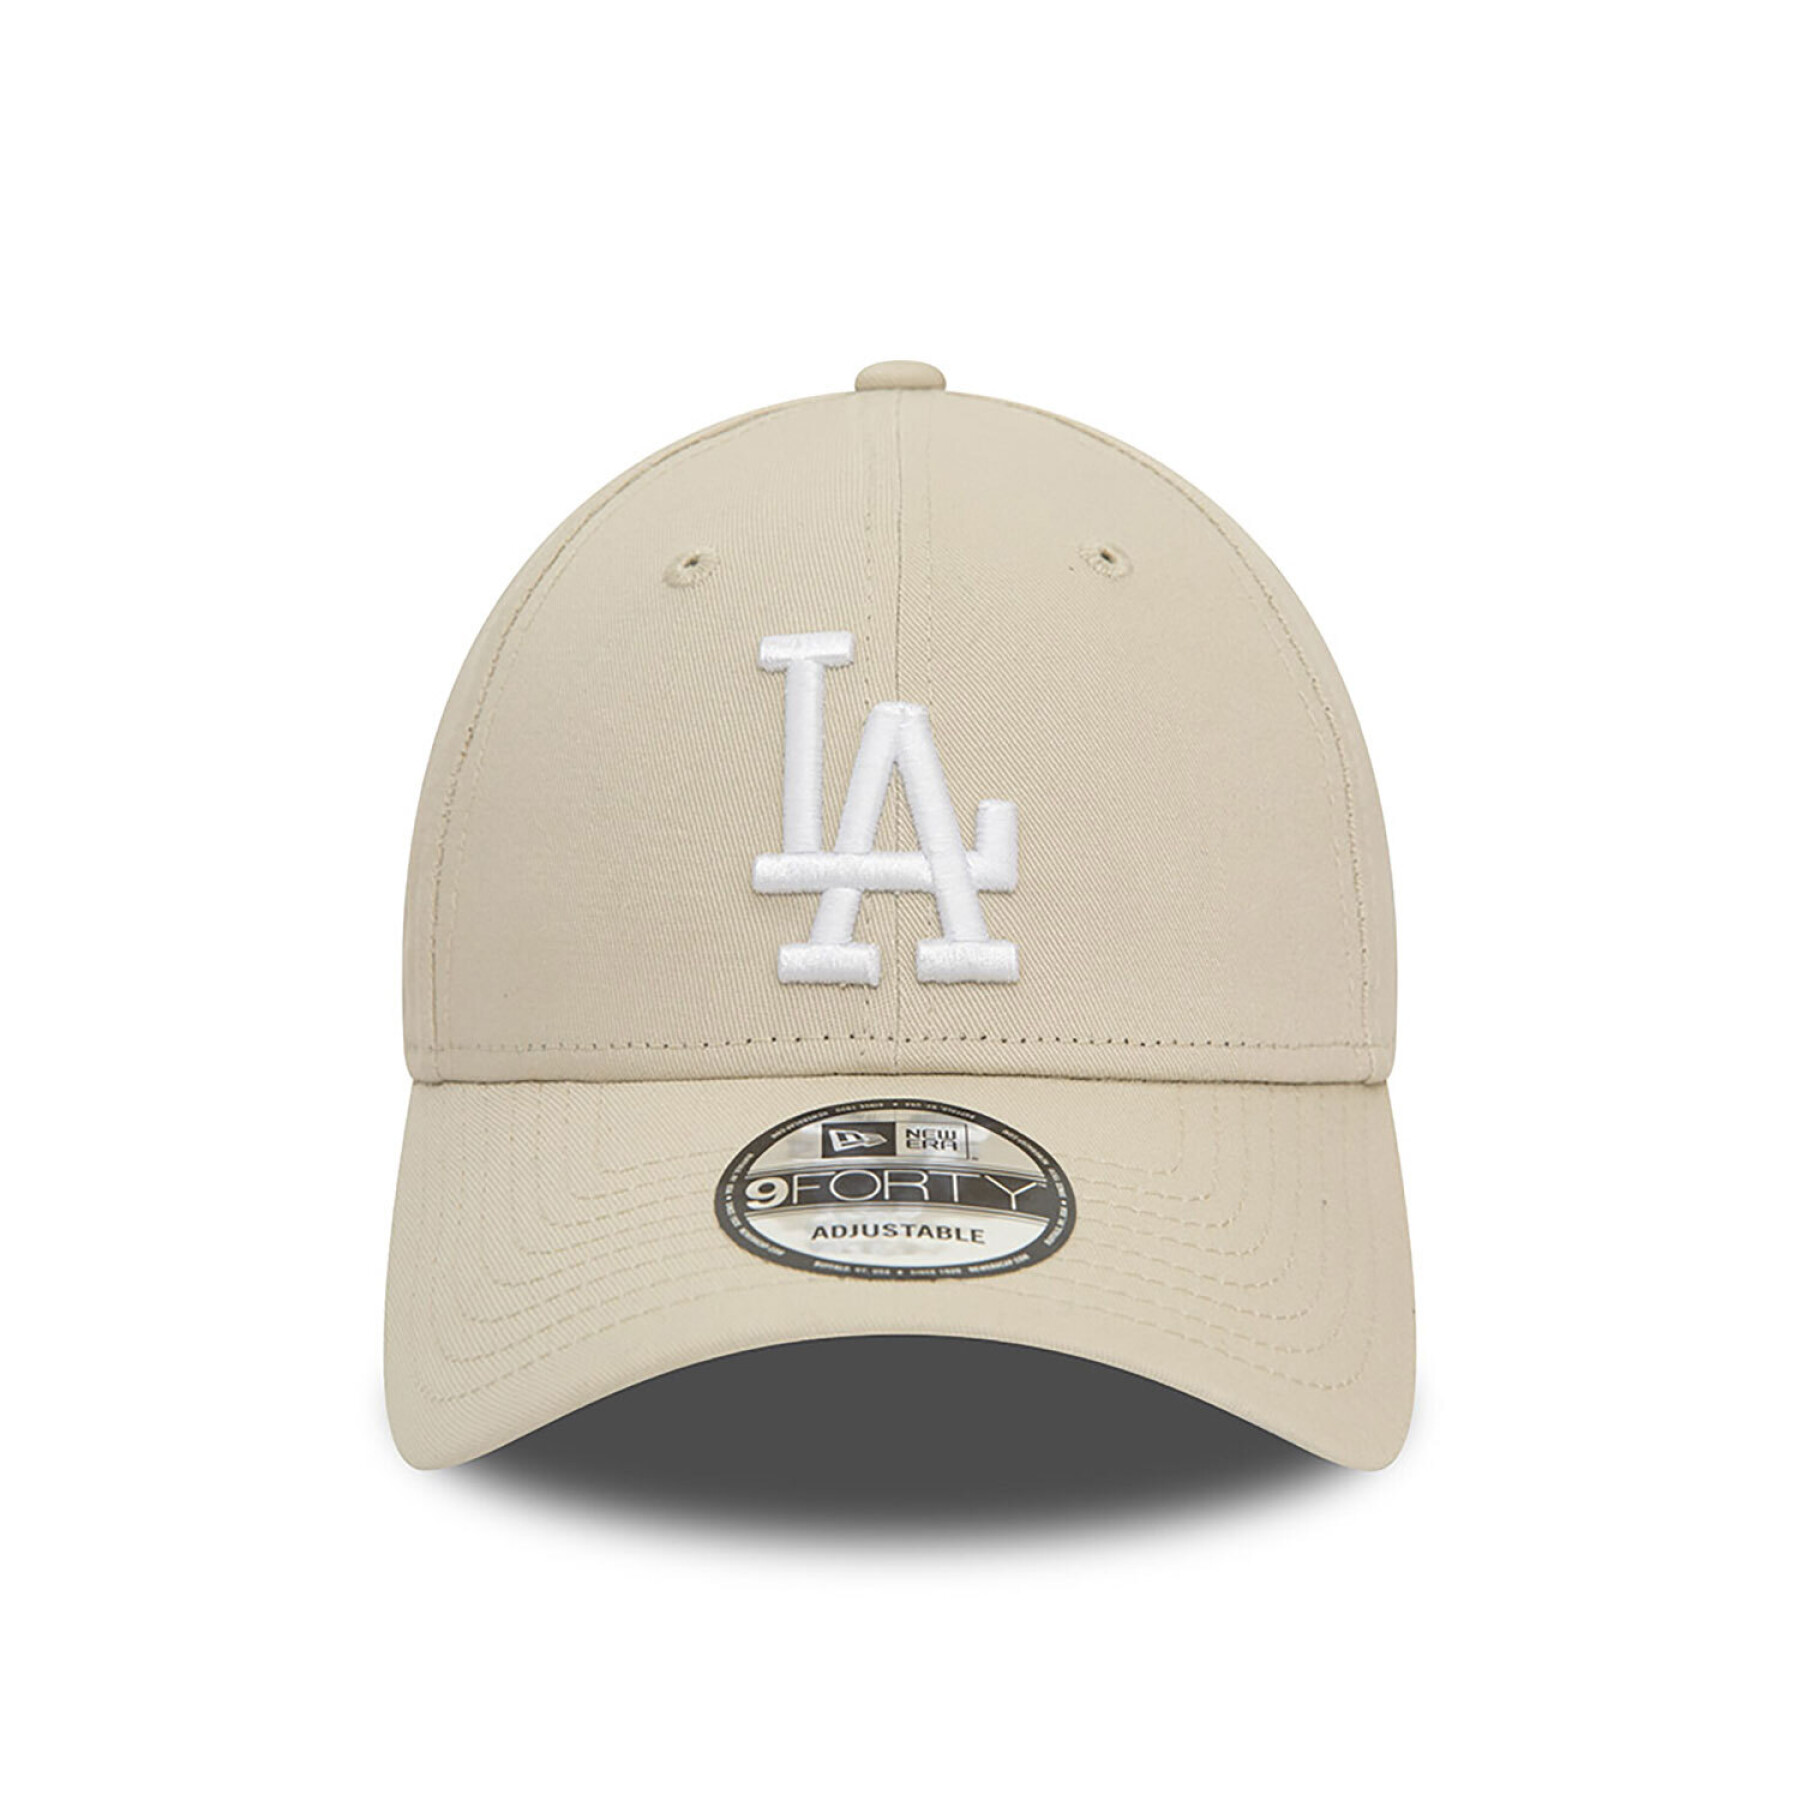 Baseball cap Los Angeles Dodgers 9Forty